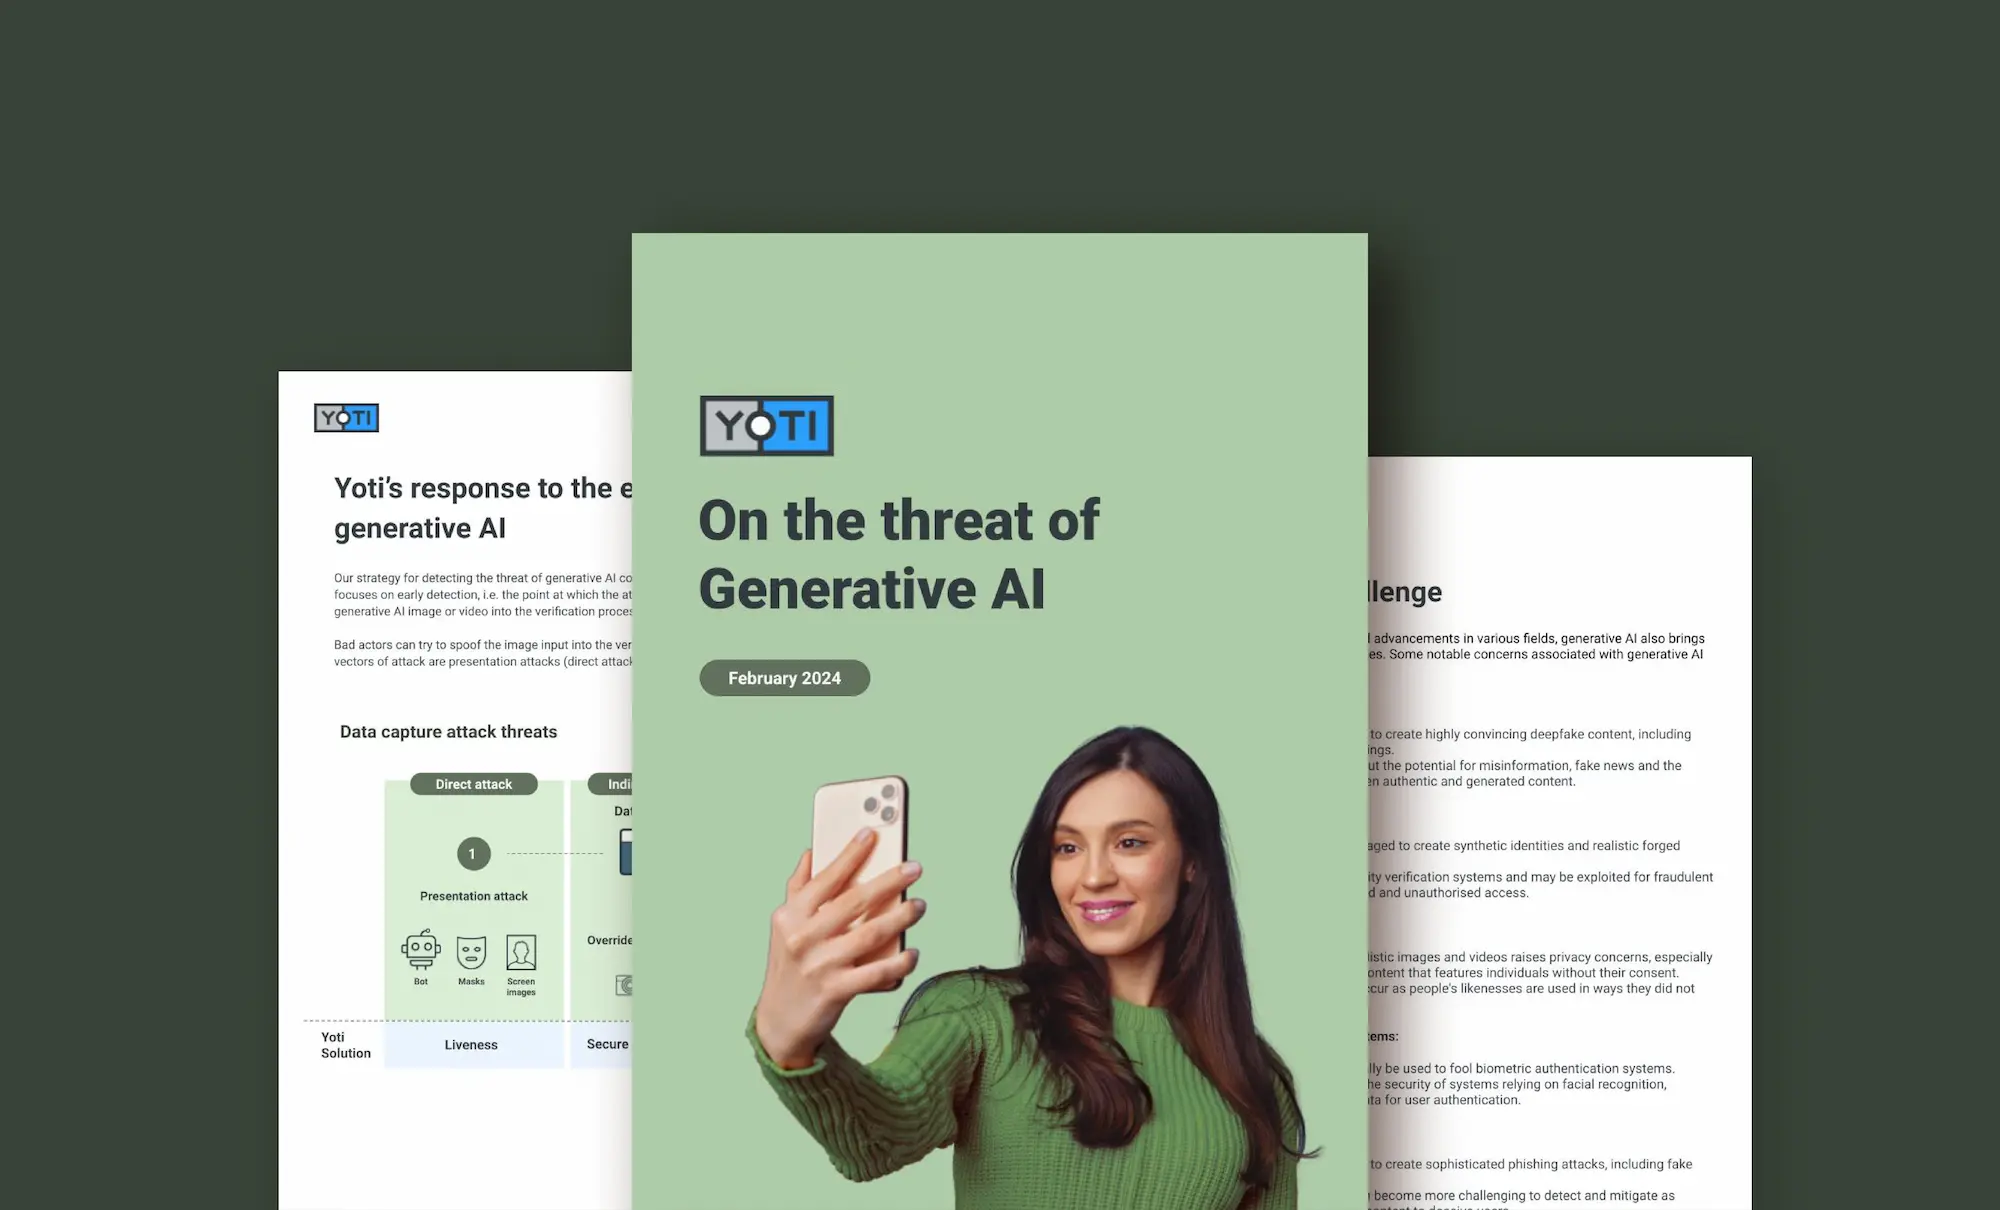 Preview of the Yoti whitepaper: On the threat of Generative AI